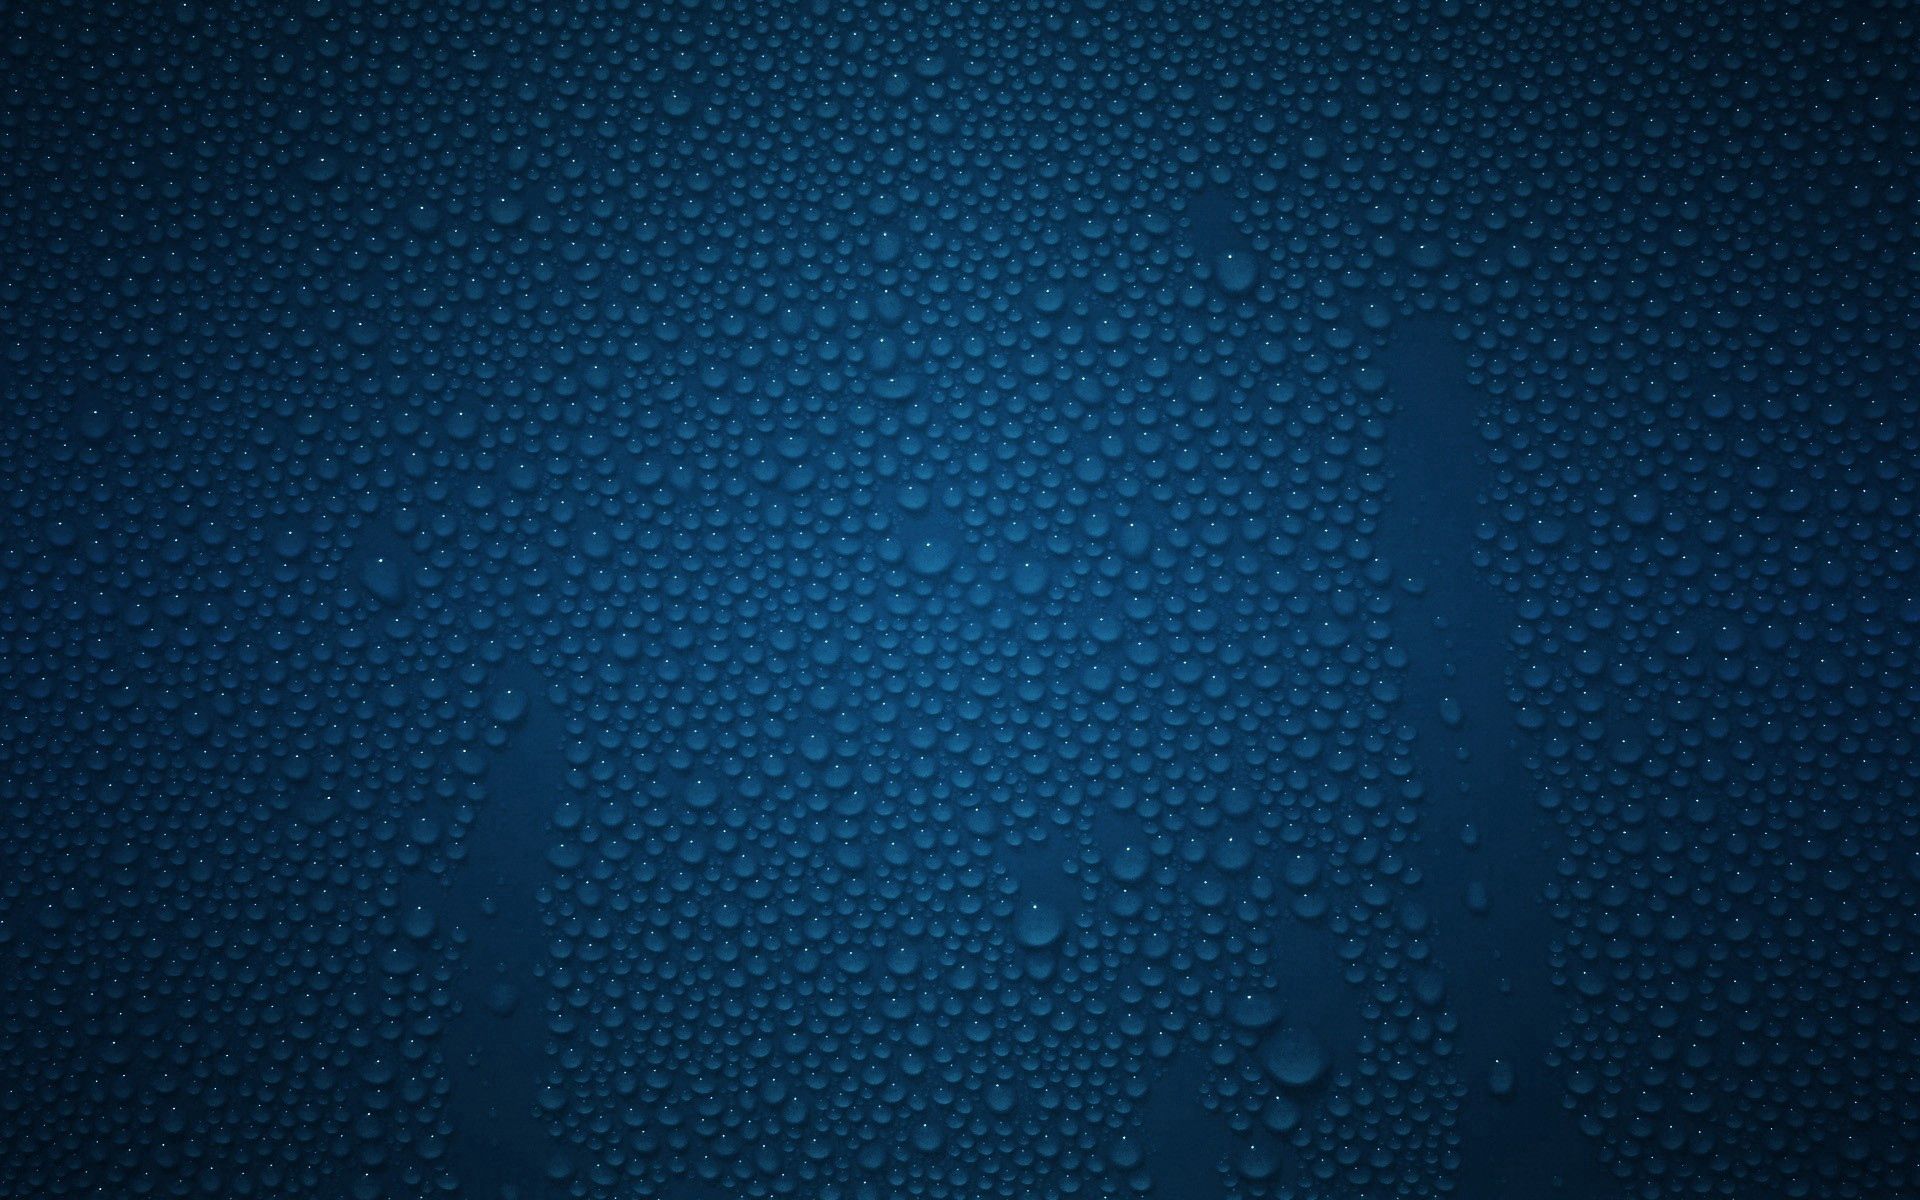 75412 download wallpaper drops, texture, textures, surface, glass screensavers and pictures for free